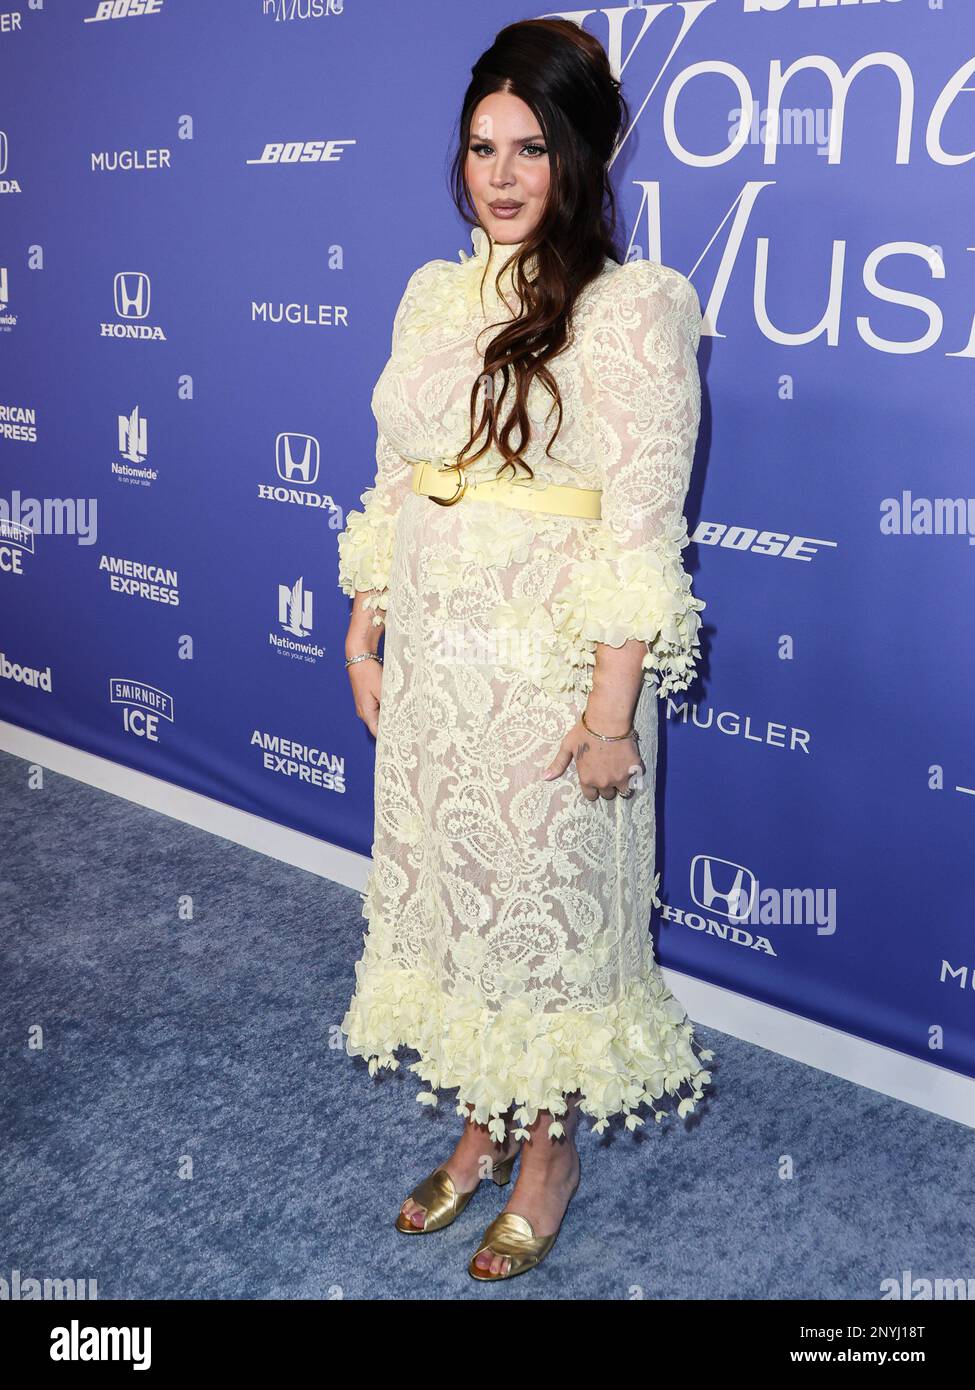 INGLEWOOD, LOS ANGELES, CALIFORNIA, USA - MARCH 01: Lana Del Rey wearing a Zimmermann dress arrives at the 2023 Billboard Women In Music held at the YouTube Theater on March 1, 2023 in Inglewood, Los Angeles, California, United States. (Photo by Xavier Collin/Image Press Agency) Stock Photo